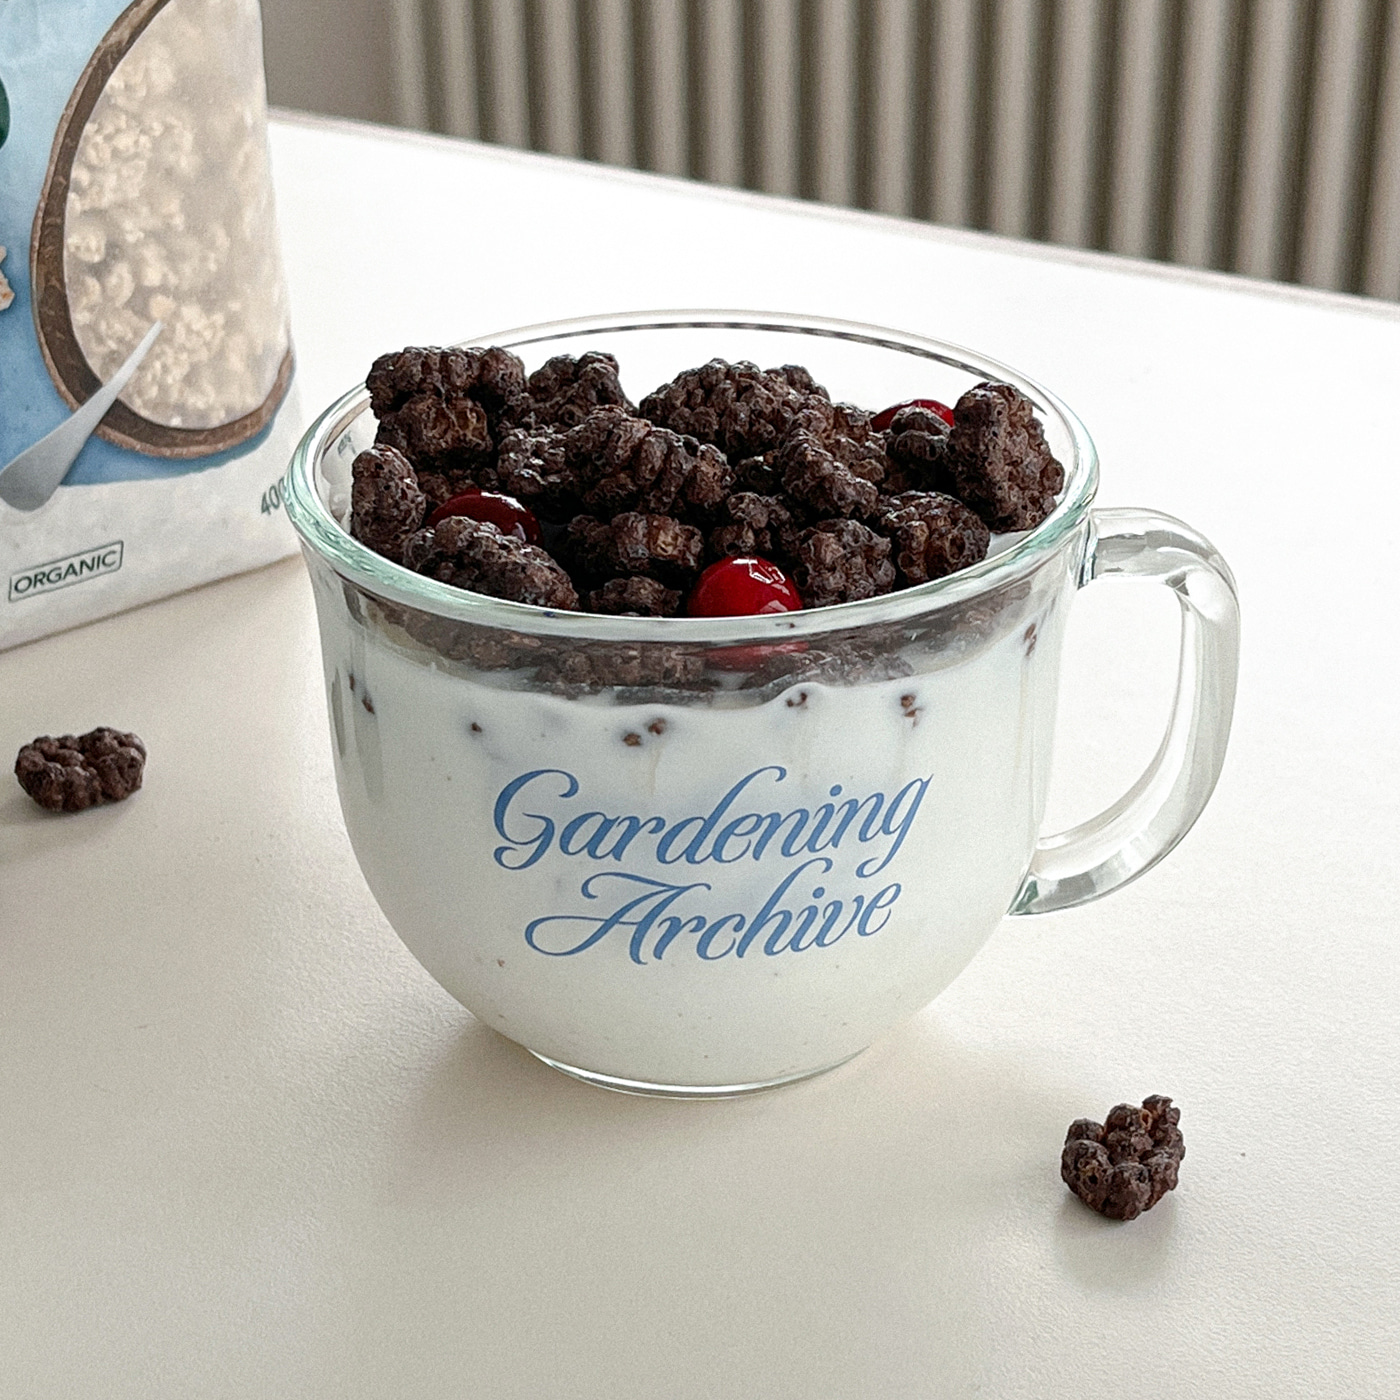 gardening archive cereal cup